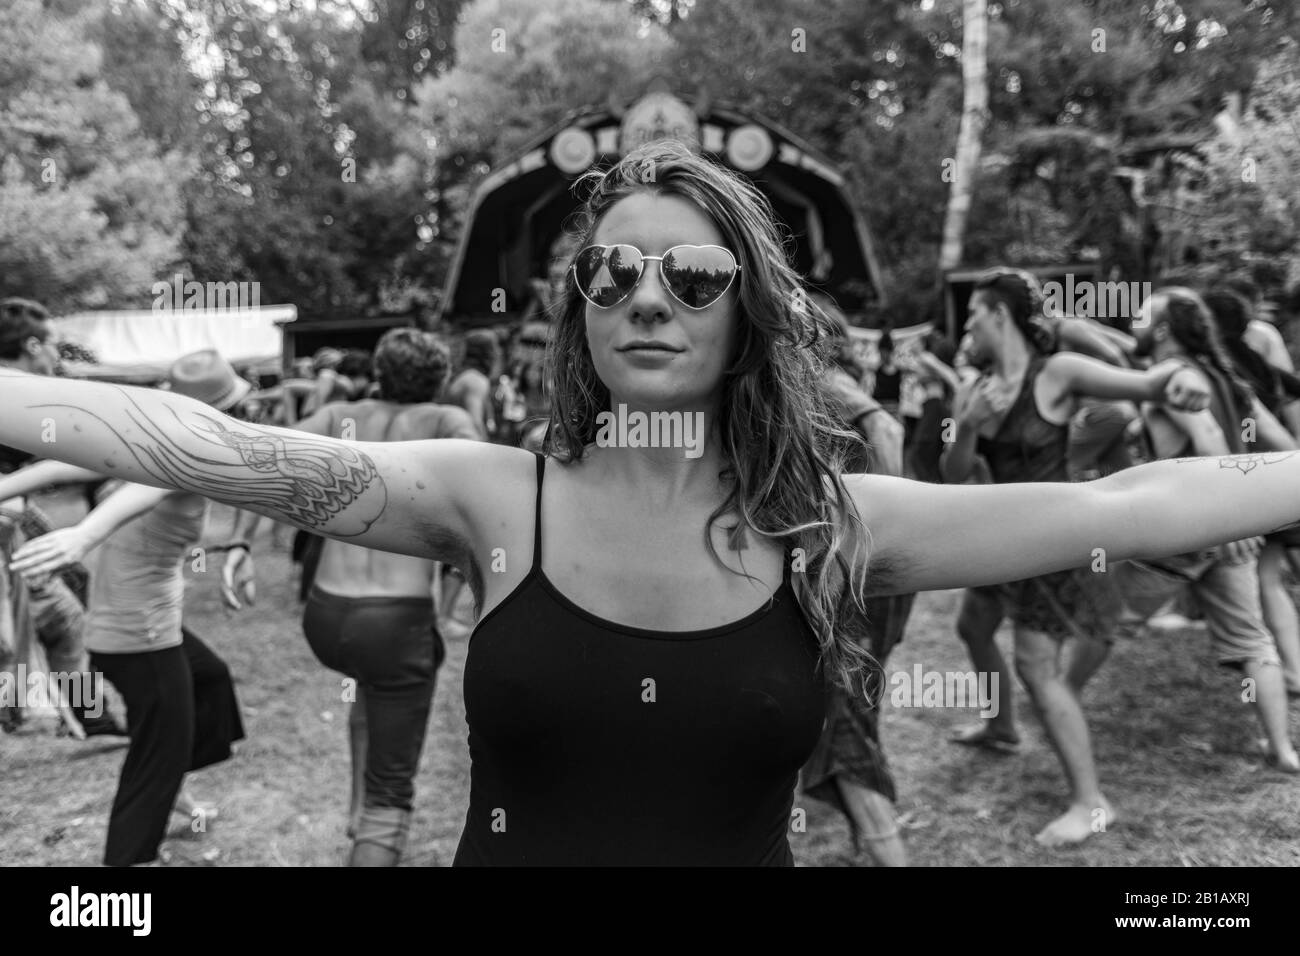 A creative monochrome view of a healthy tattooed woman wearing black vest with open arms at multicultural festival celebrating earth and spirituality Stock Photo